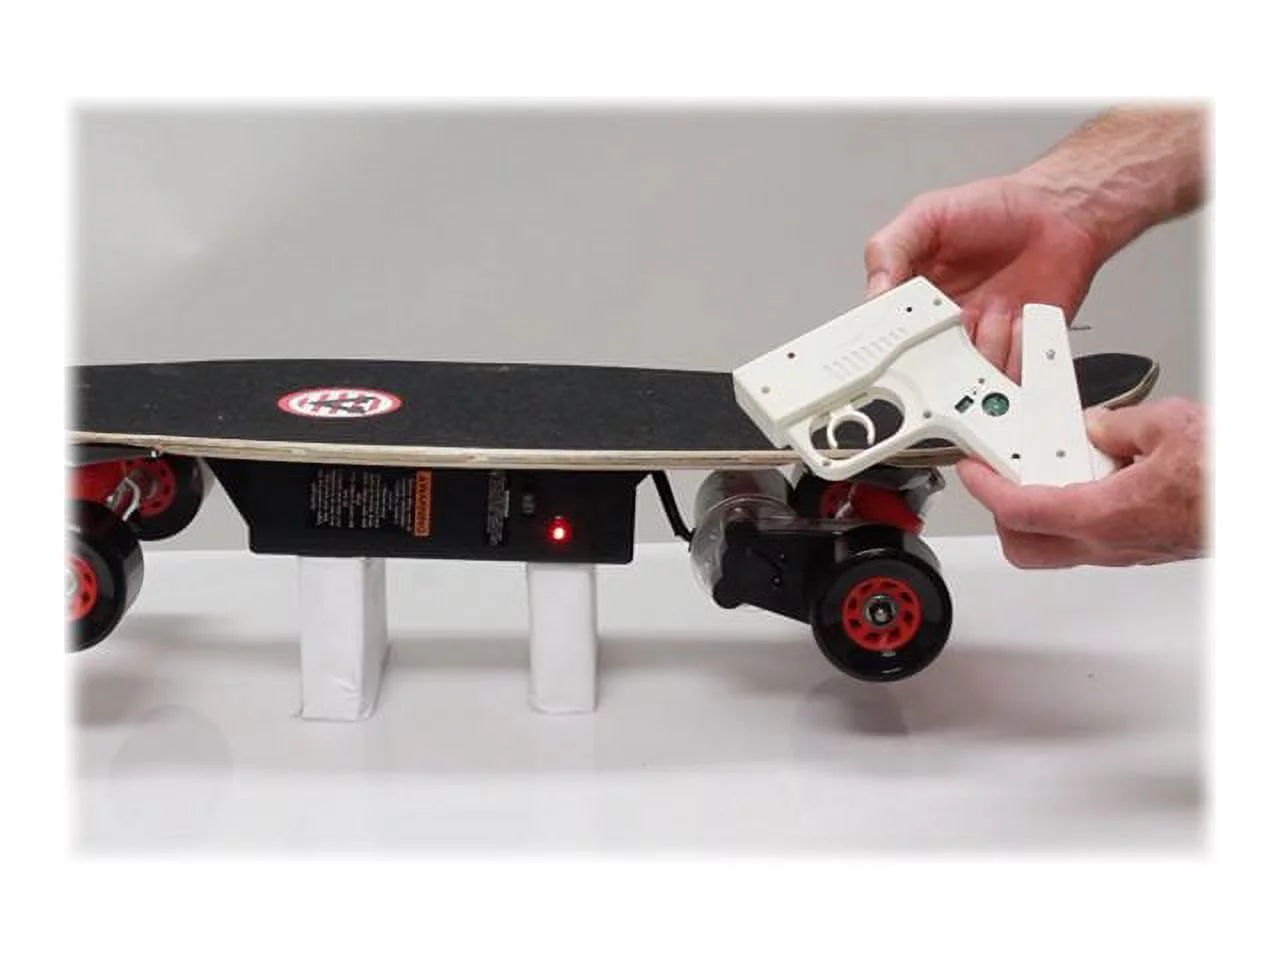 How Fast Is The Altered Fantom 1 Electric Skateboard